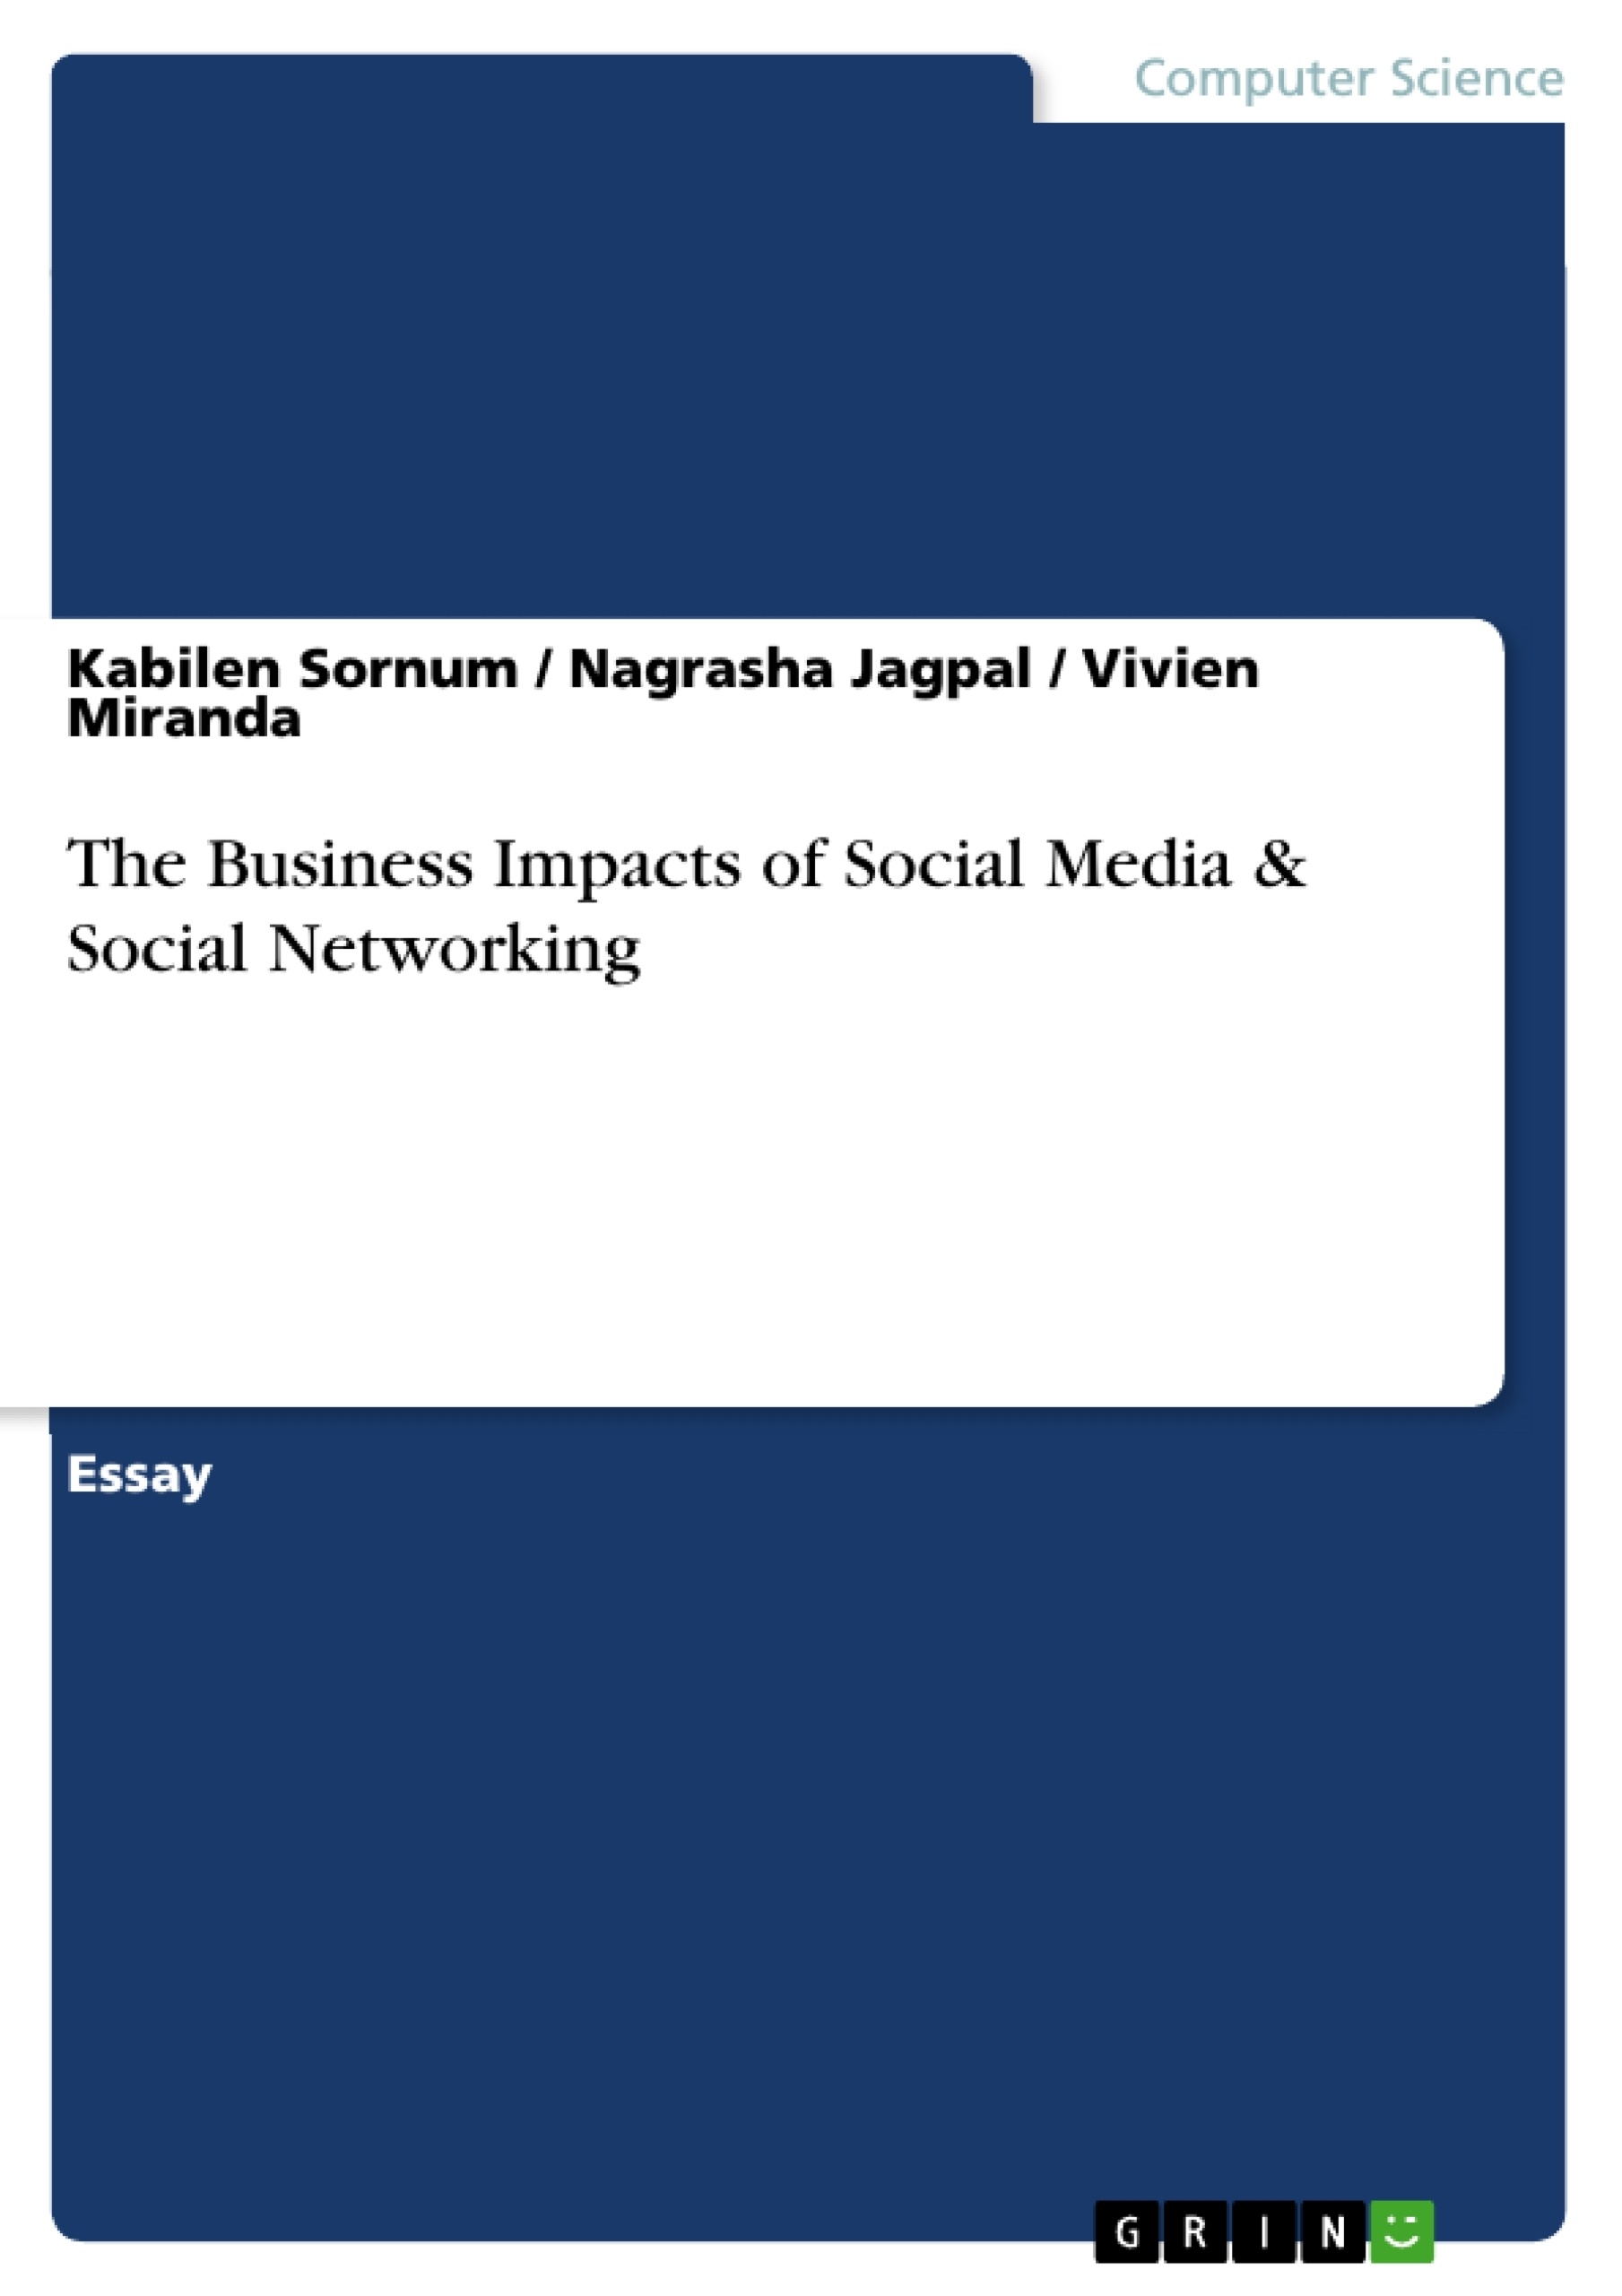 Title: The Business Impacts of Social Media & Social Networking